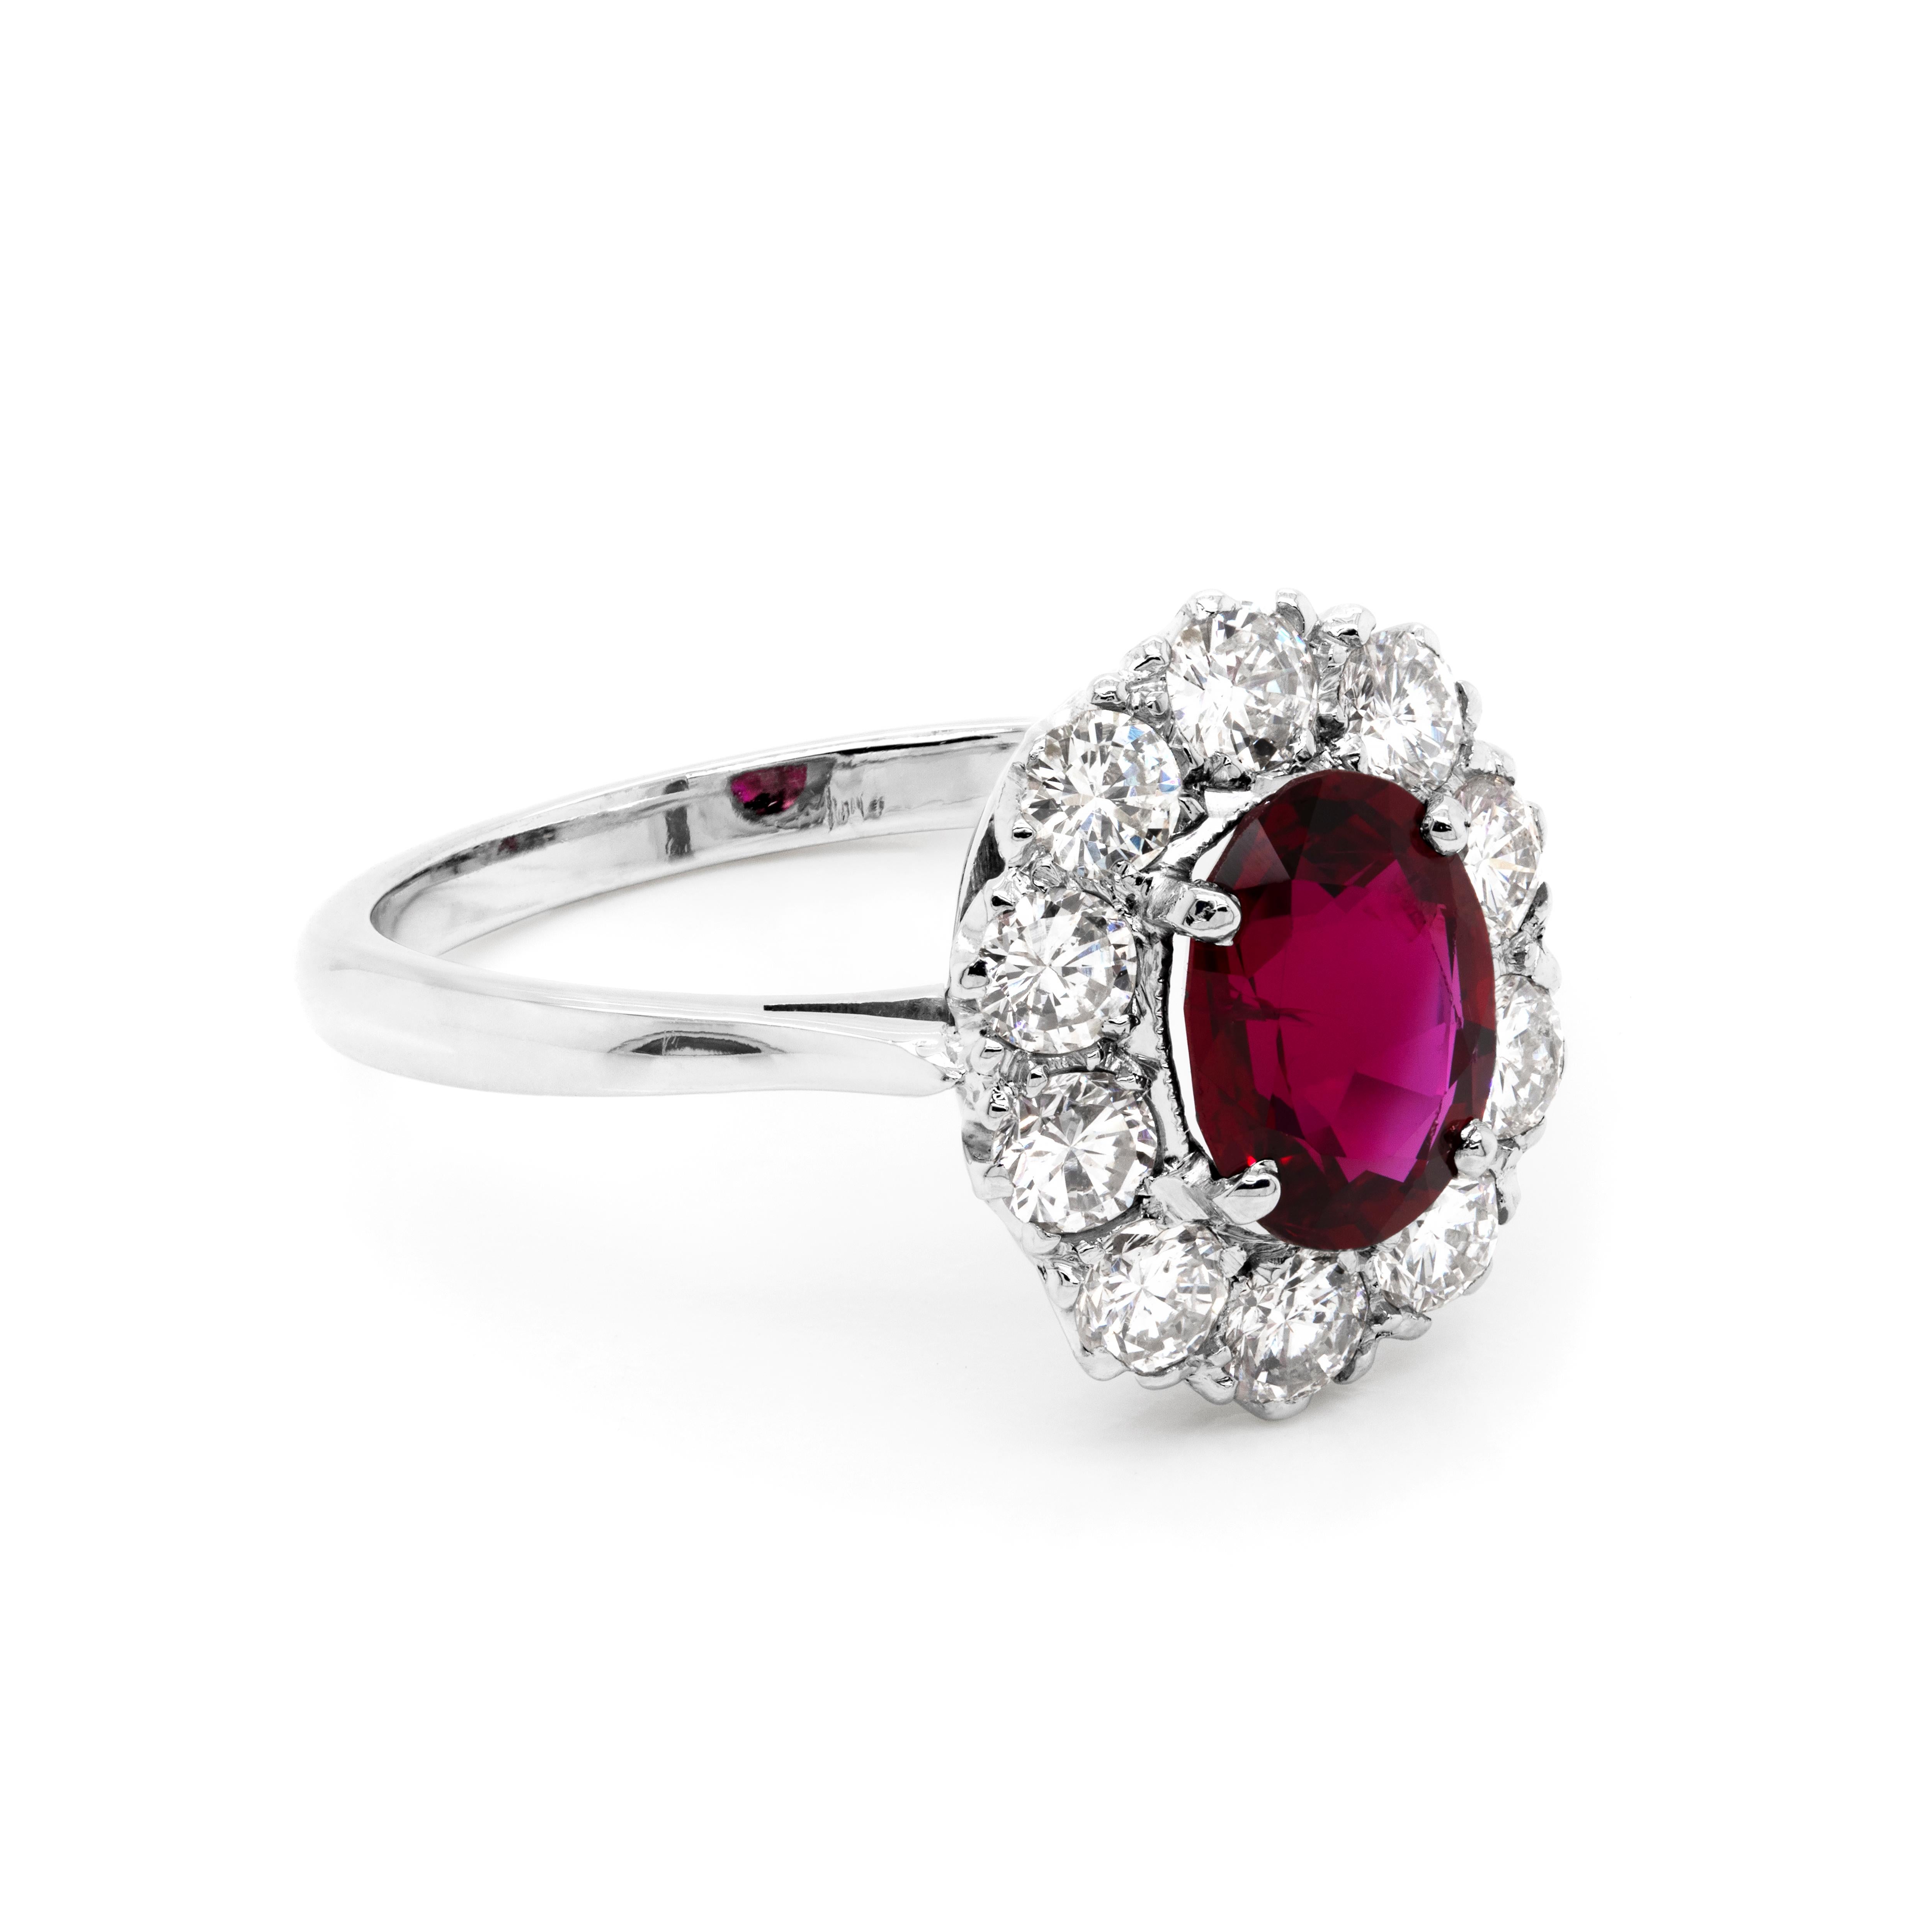 Lovely coronet set cluster engagement ring featuring a 1.44ct natural oval red ruby, claw set in the centre of ten round brilliant cut diamonds with an approximate total diamond weight of 1.00ct. The stones are beautifully set in their original